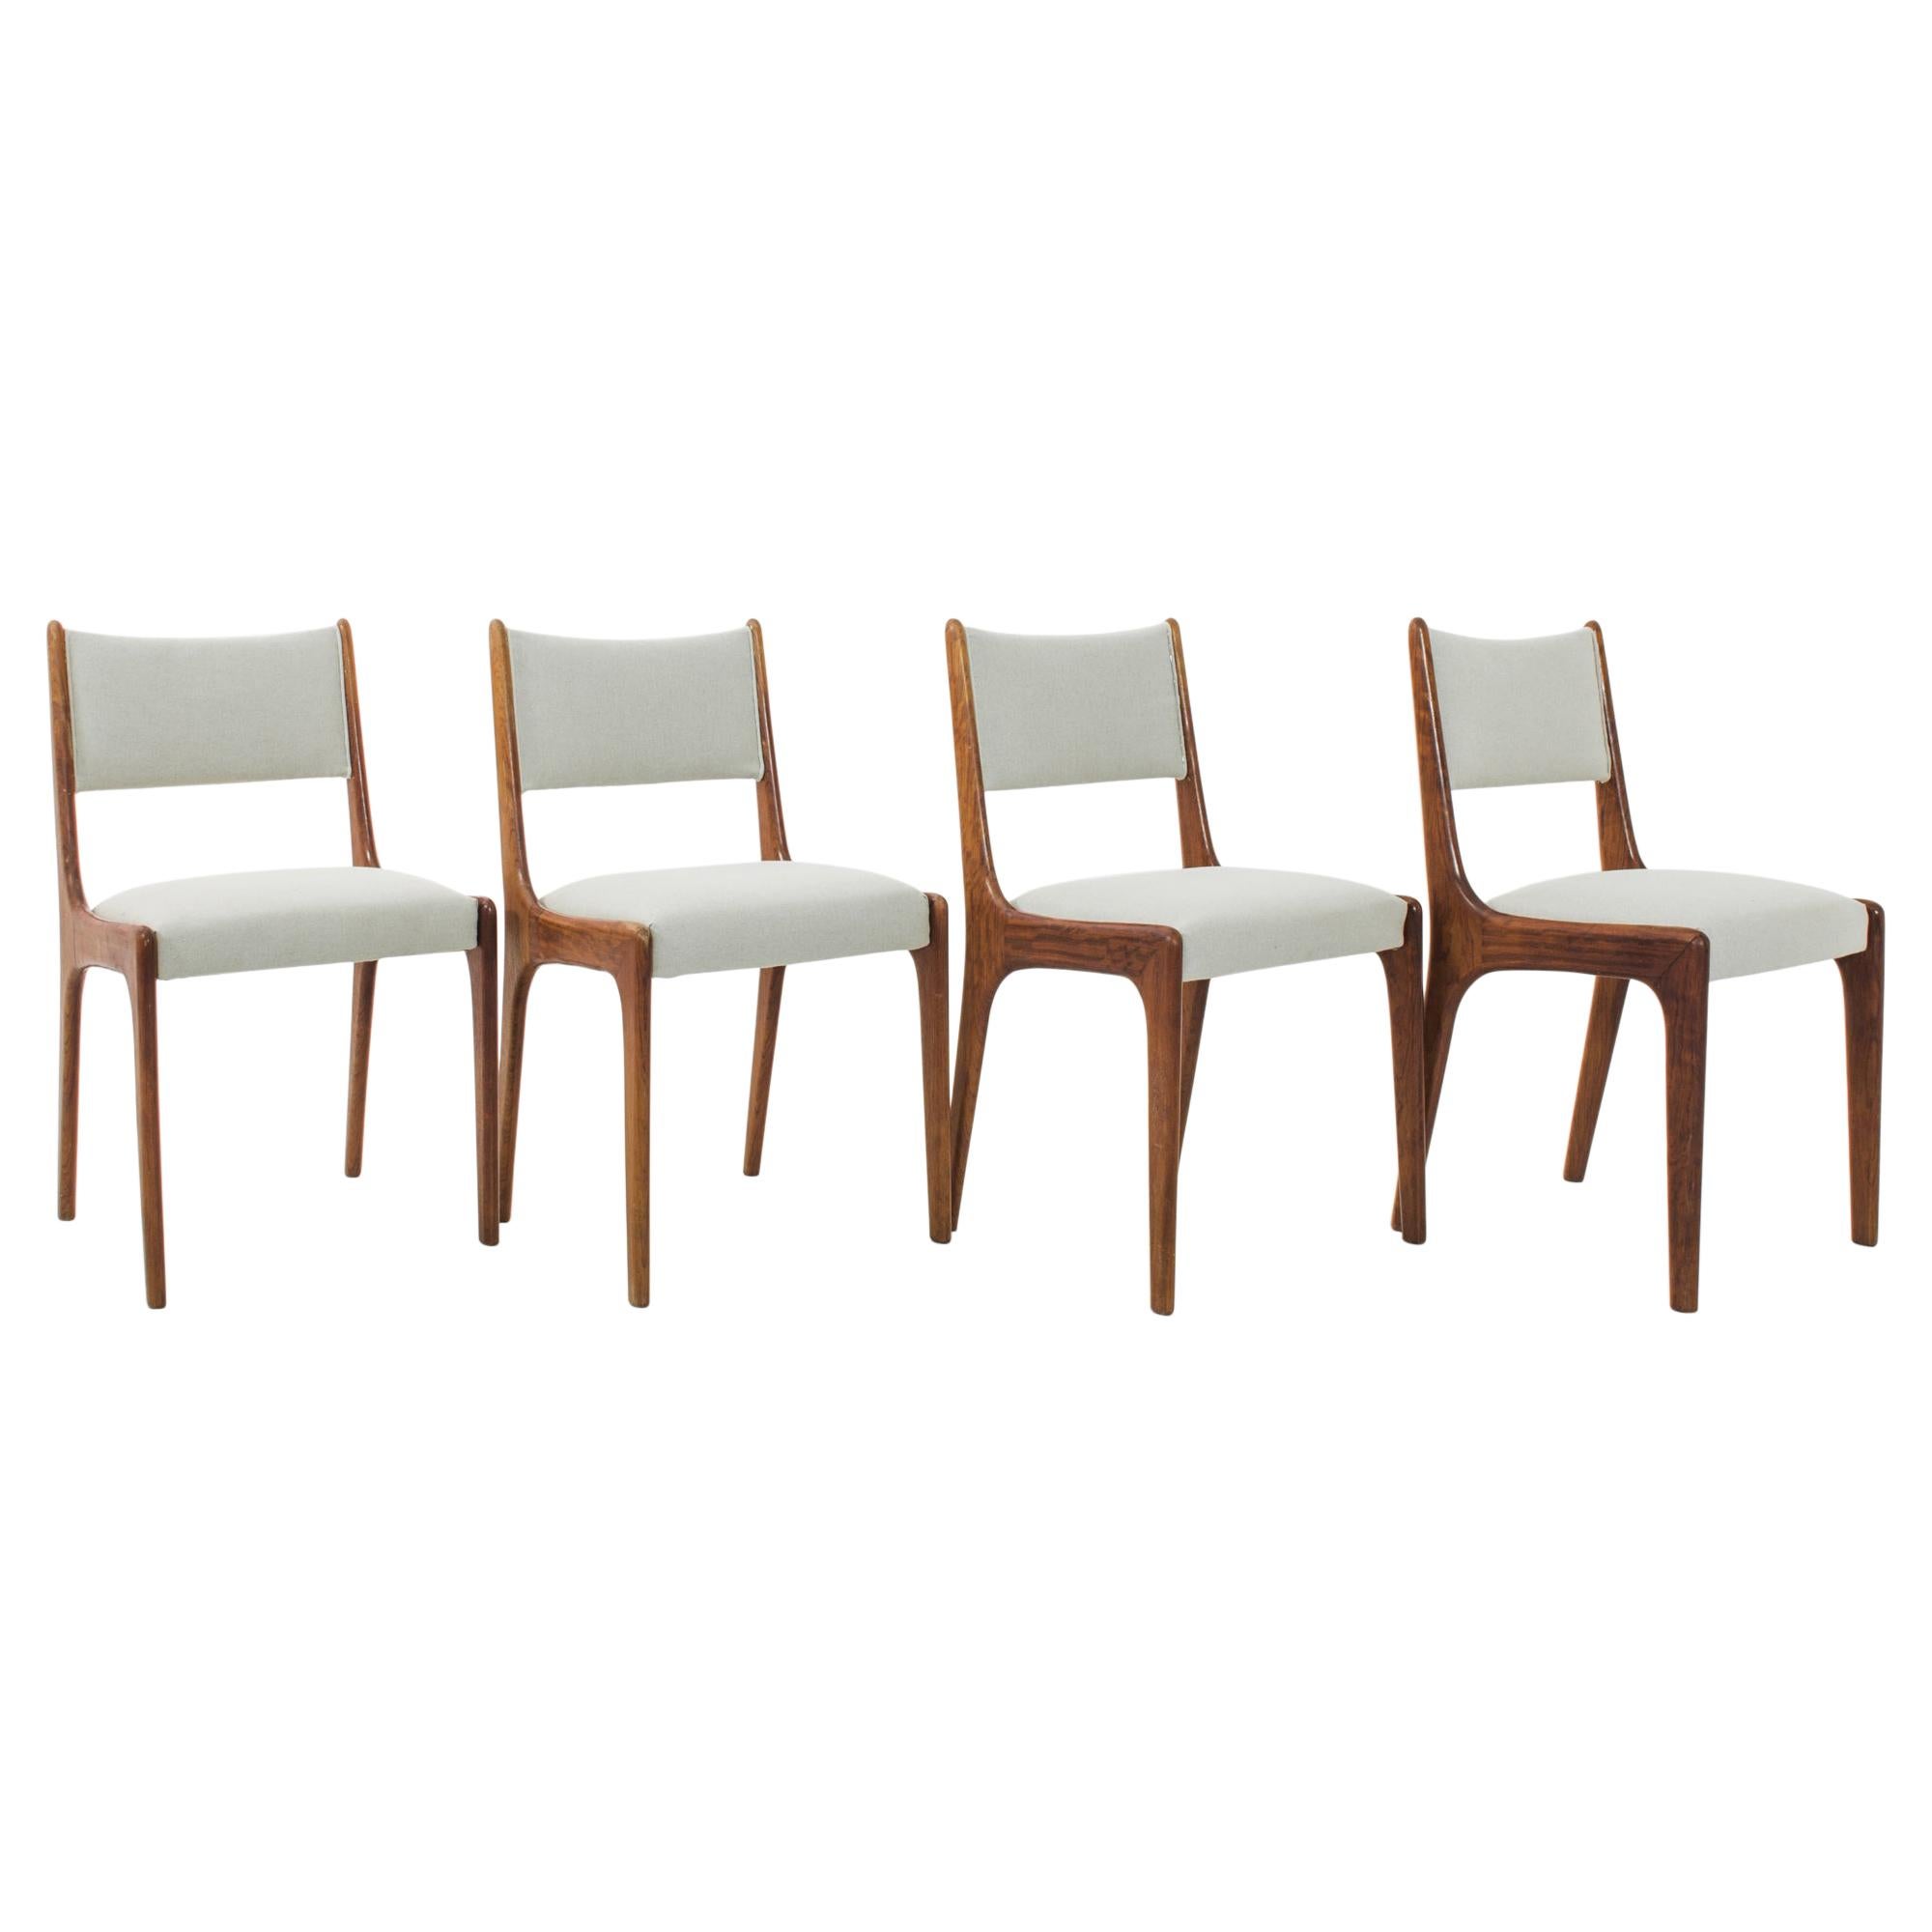 1970s Danish Teak Upholstered Dining Chairs, Set of Four